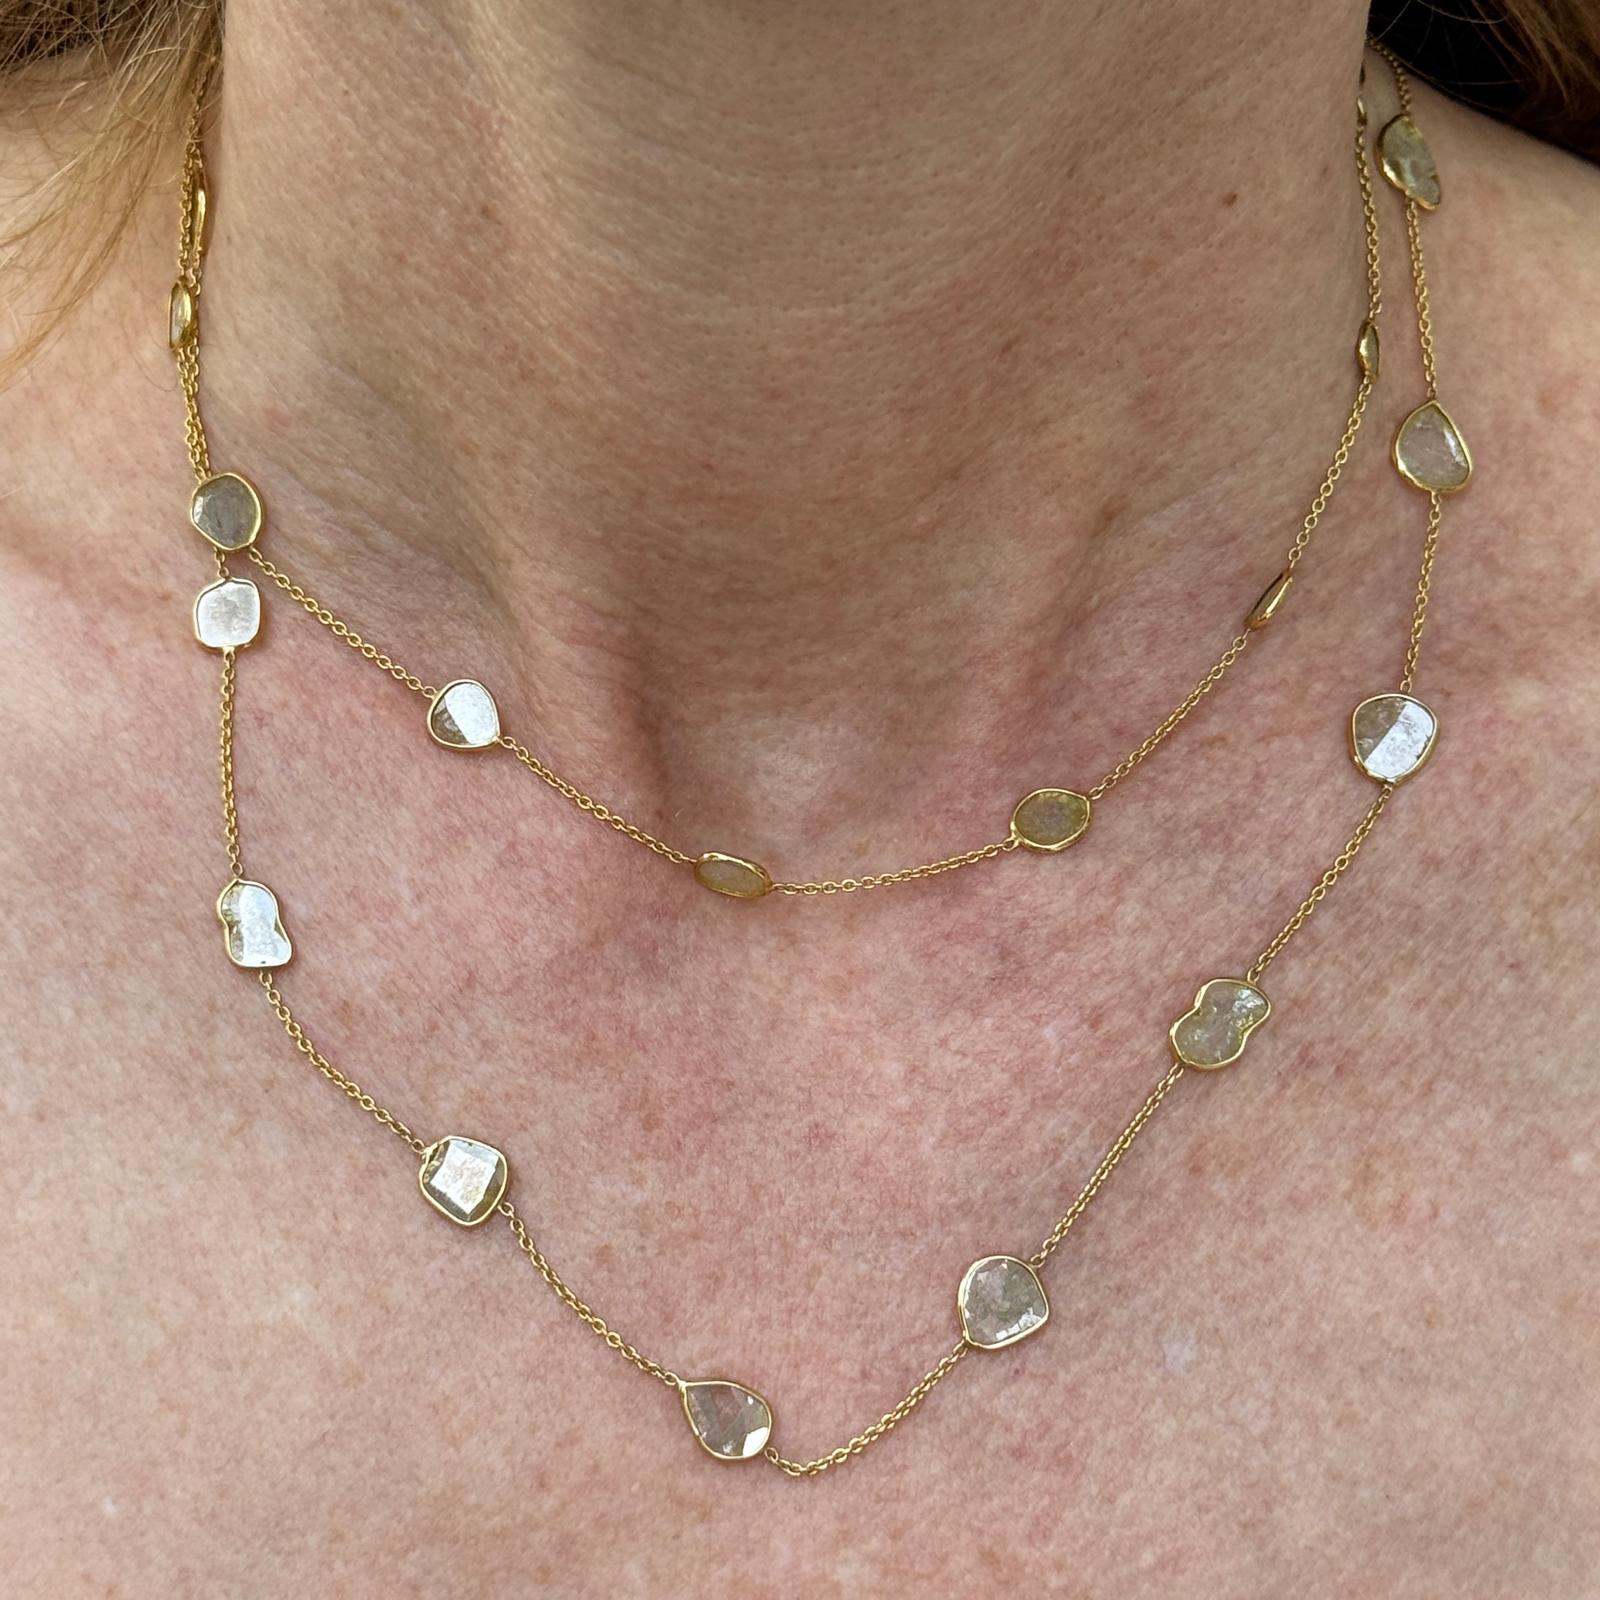 Diamond by the yard modern necklace crafted in 18 karat yellow gold. The necklace features 27 rose cut diamonds weighing approximately 10.0 carat total weight. The necklace measures 32 inches in length. Weight: 7.0 grams.